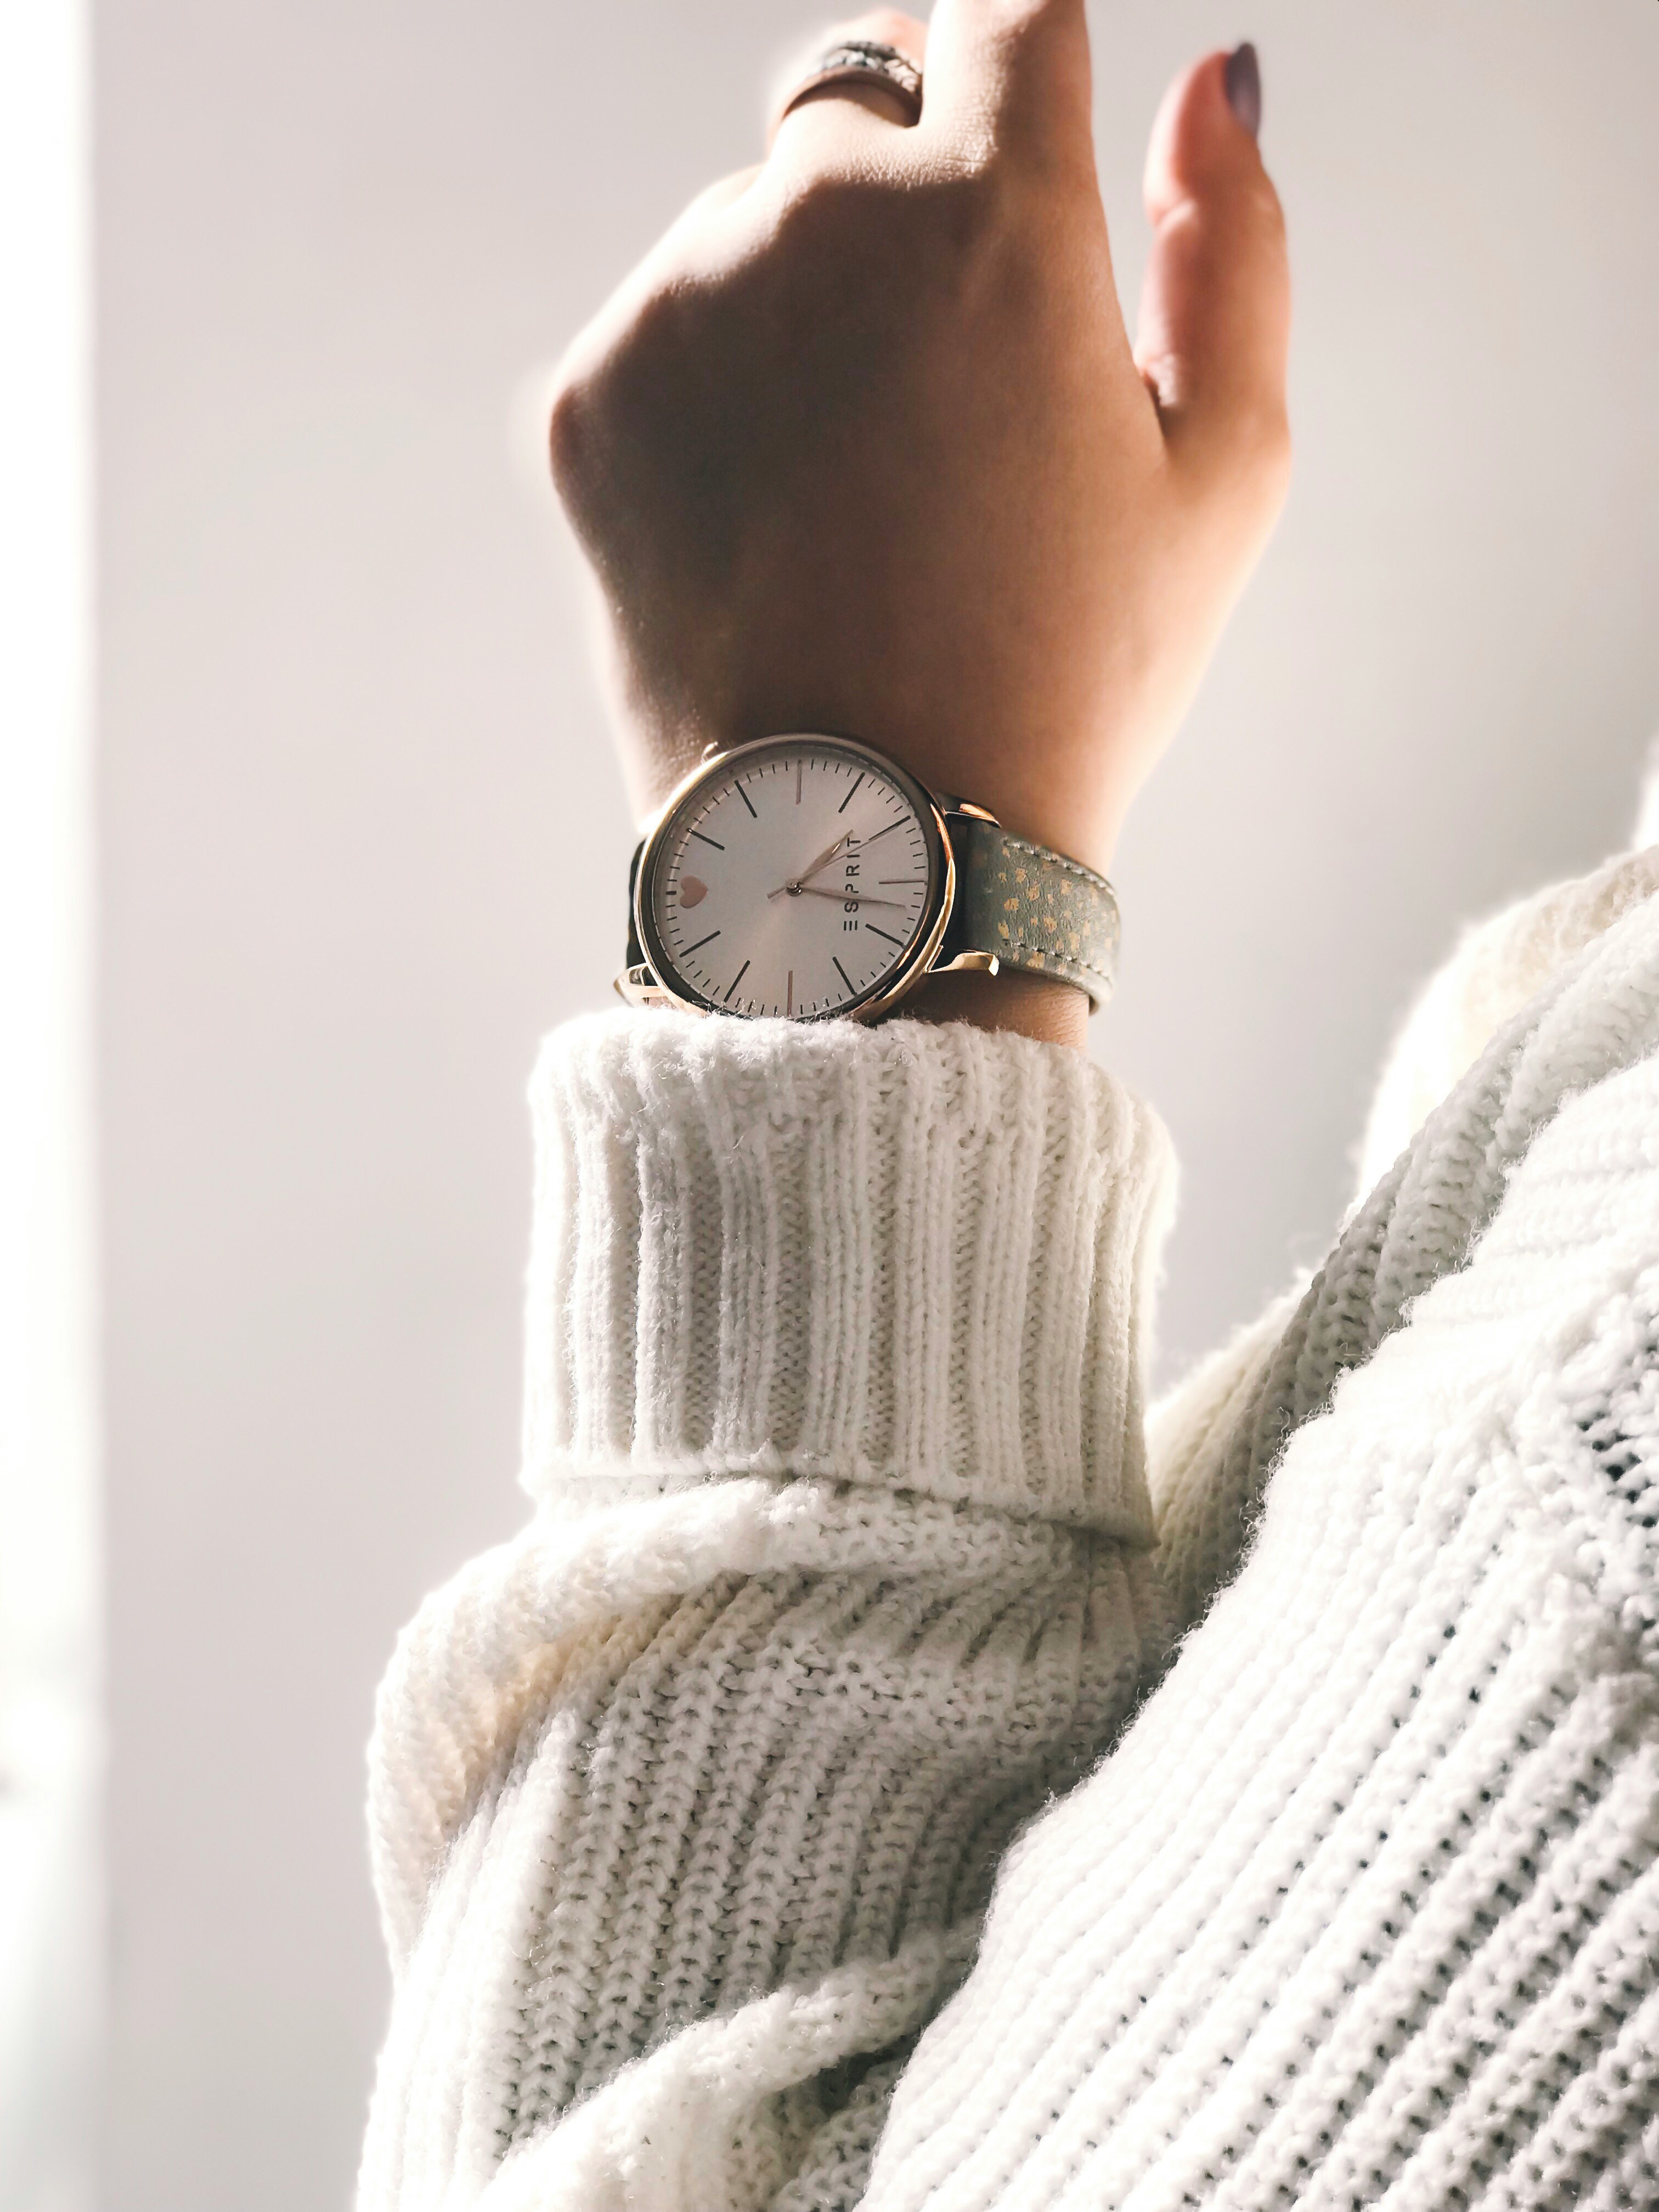 A person's wrist with a watch | Source: Unsplash